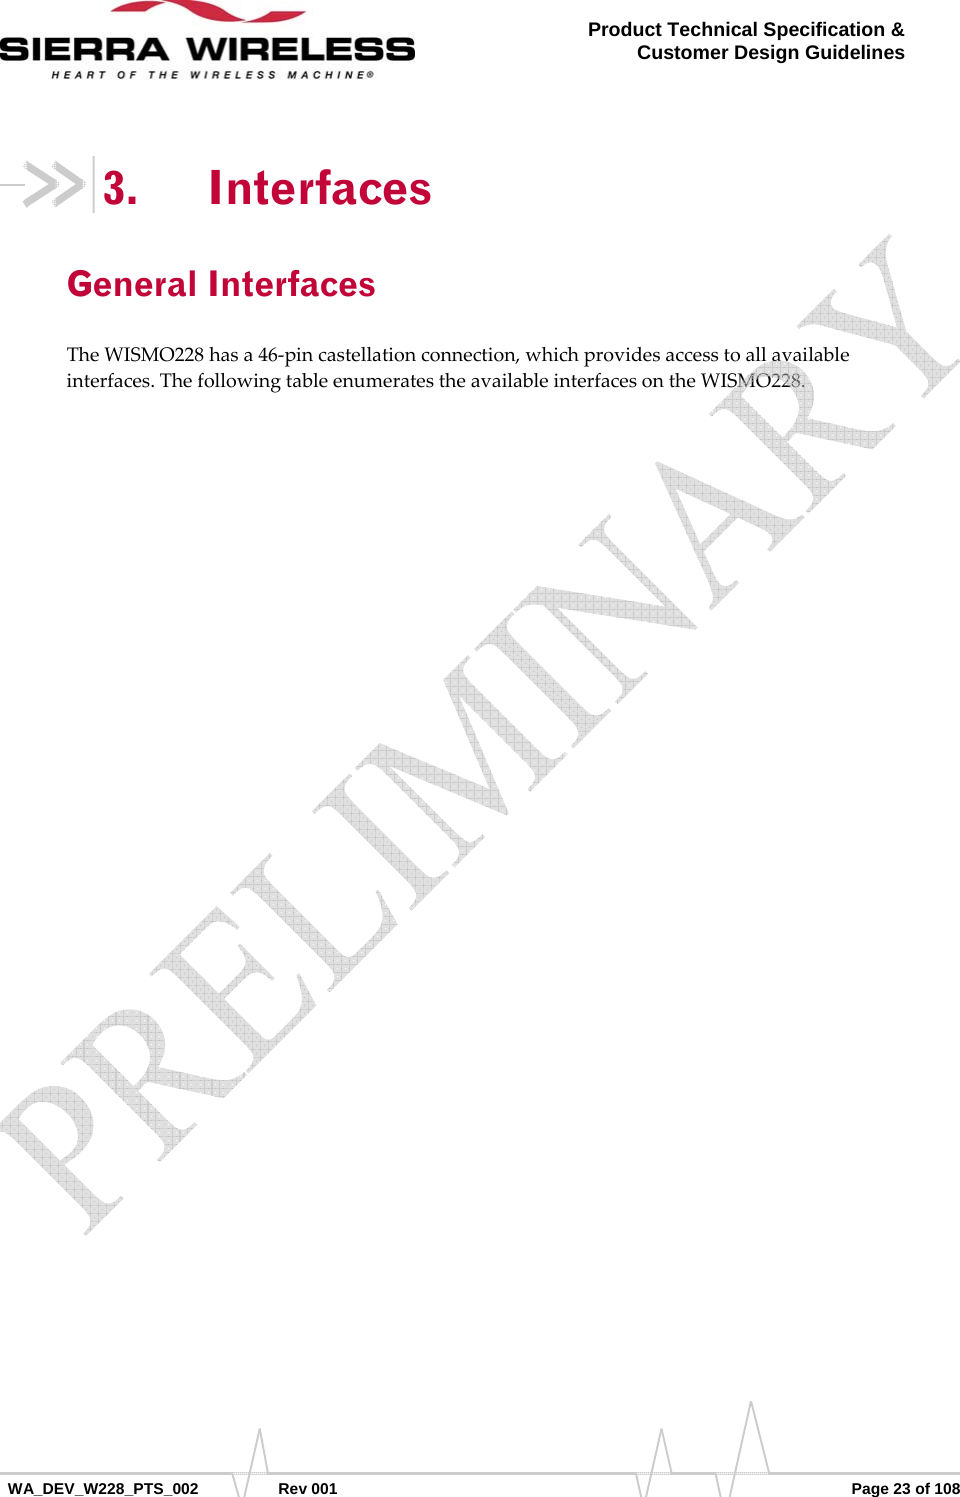      WA_DEV_W228_PTS_002 Rev 001  Page 23 of 108 Product Technical Specification &amp; Customer Design Guidelines 3. Interfaces General Interfaces TheWISMO228hasa46‐pincastellationconnection,whichprovidesaccesstoallavailableinterfaces.ThefollowingtableenumeratestheavailableinterfacesontheWISMO228.   